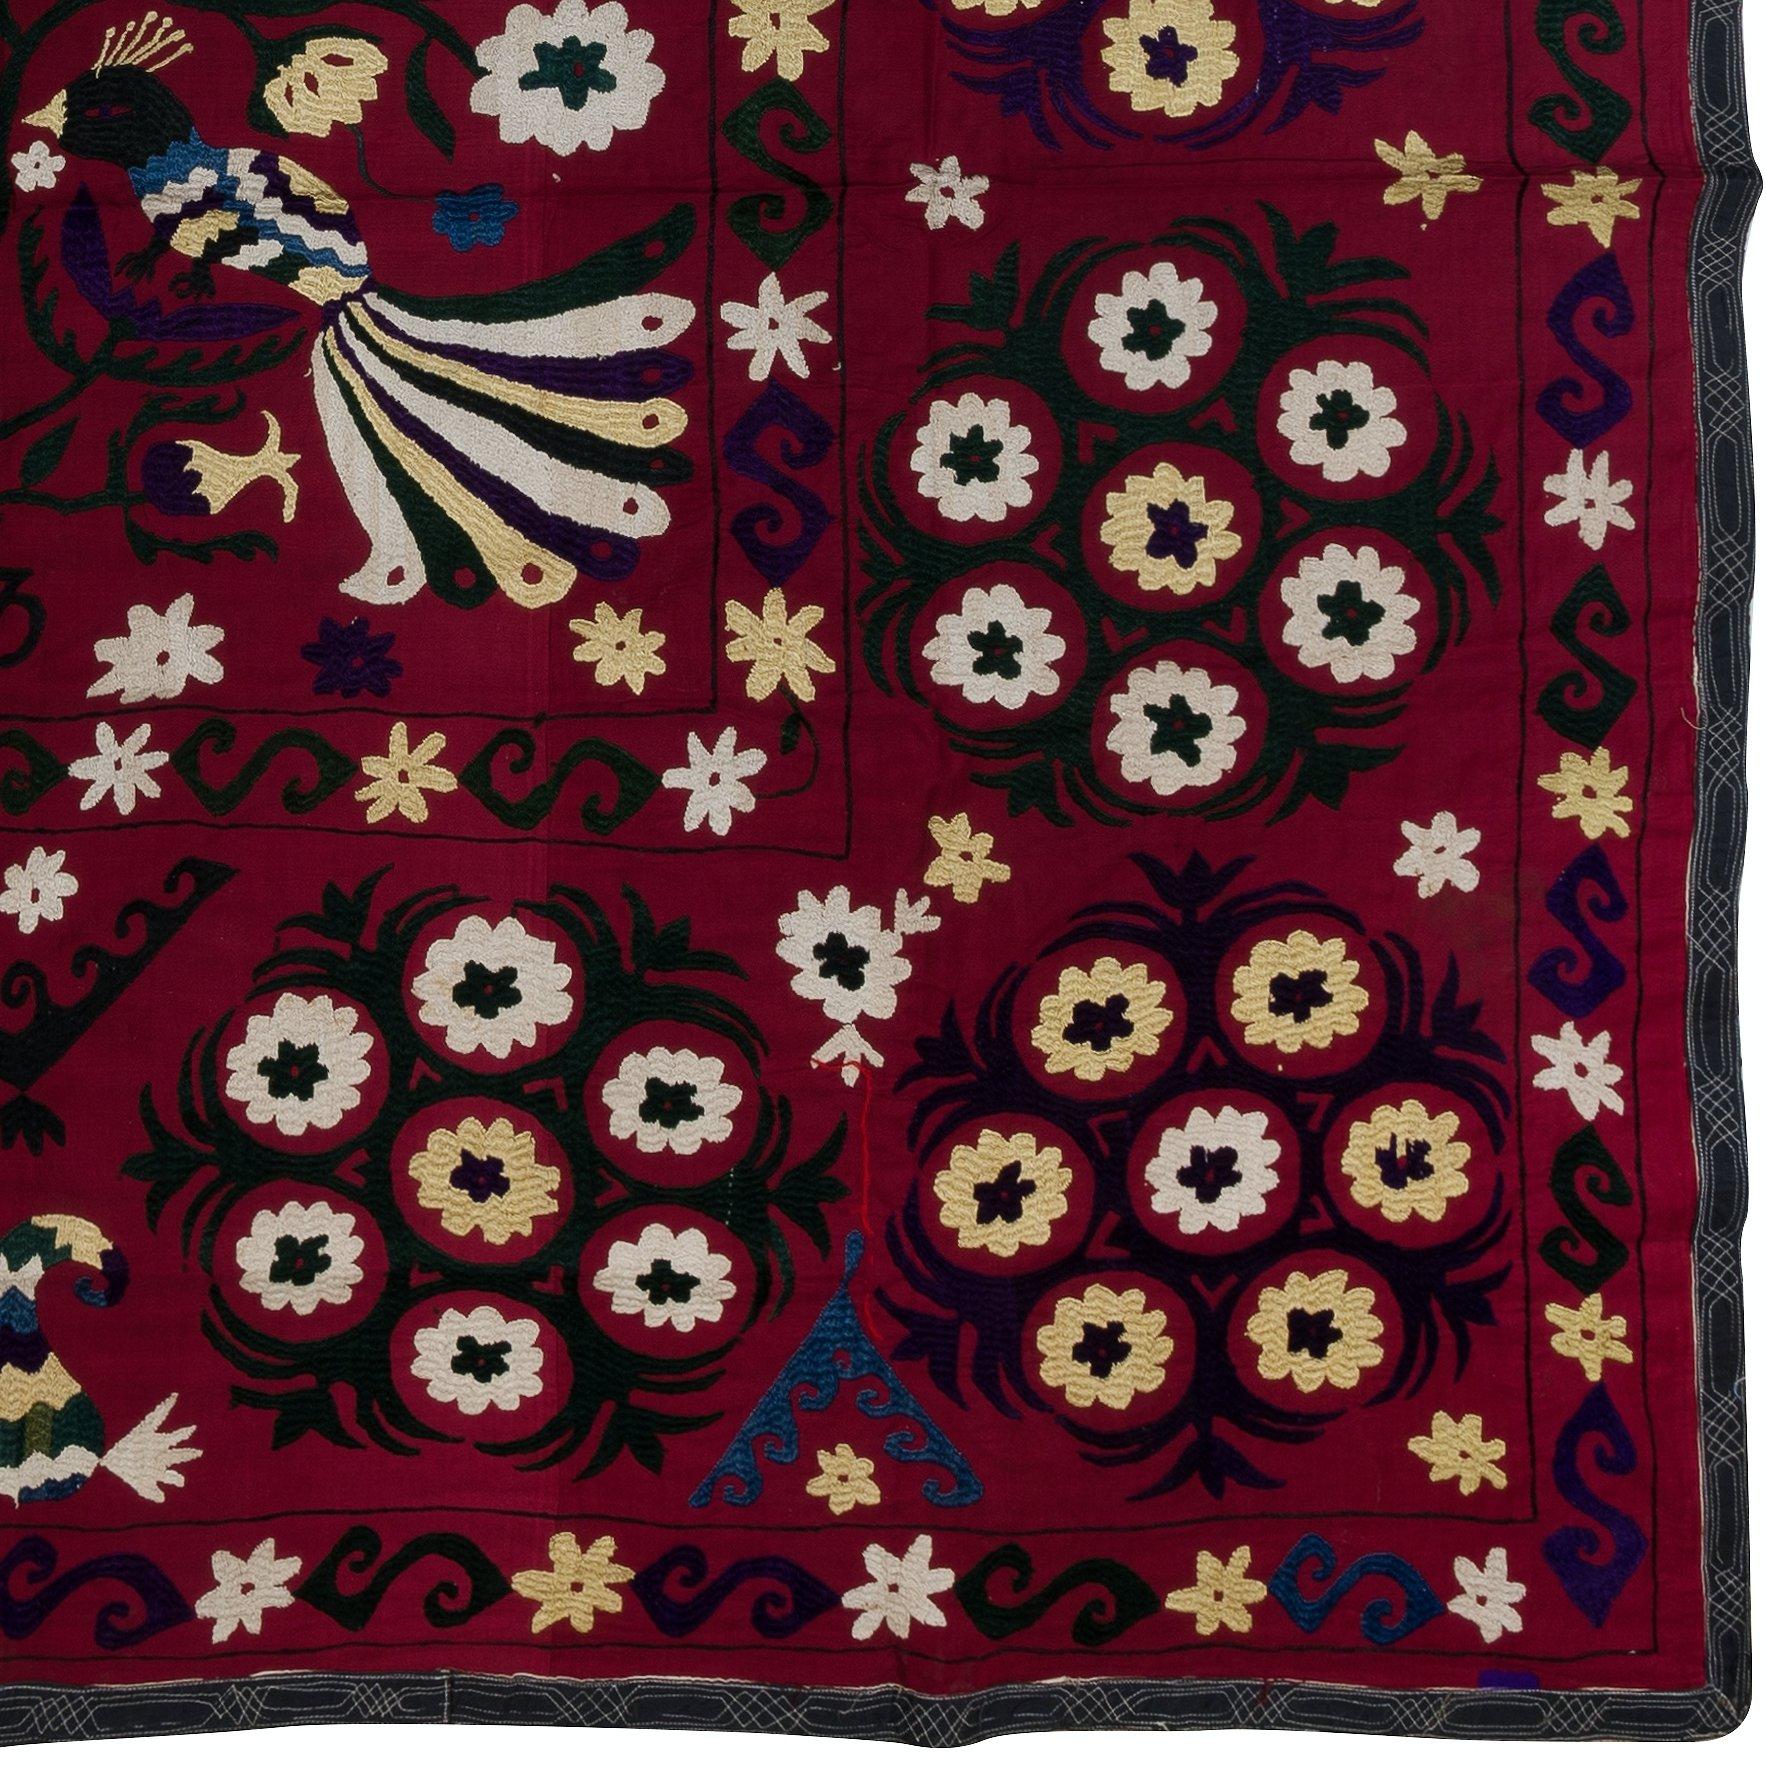 Uzbek 6.3x7.3 ft Silk Embroidery Wall Hanging, Bird & Floral Pattern Suzani Bed Cover For Sale